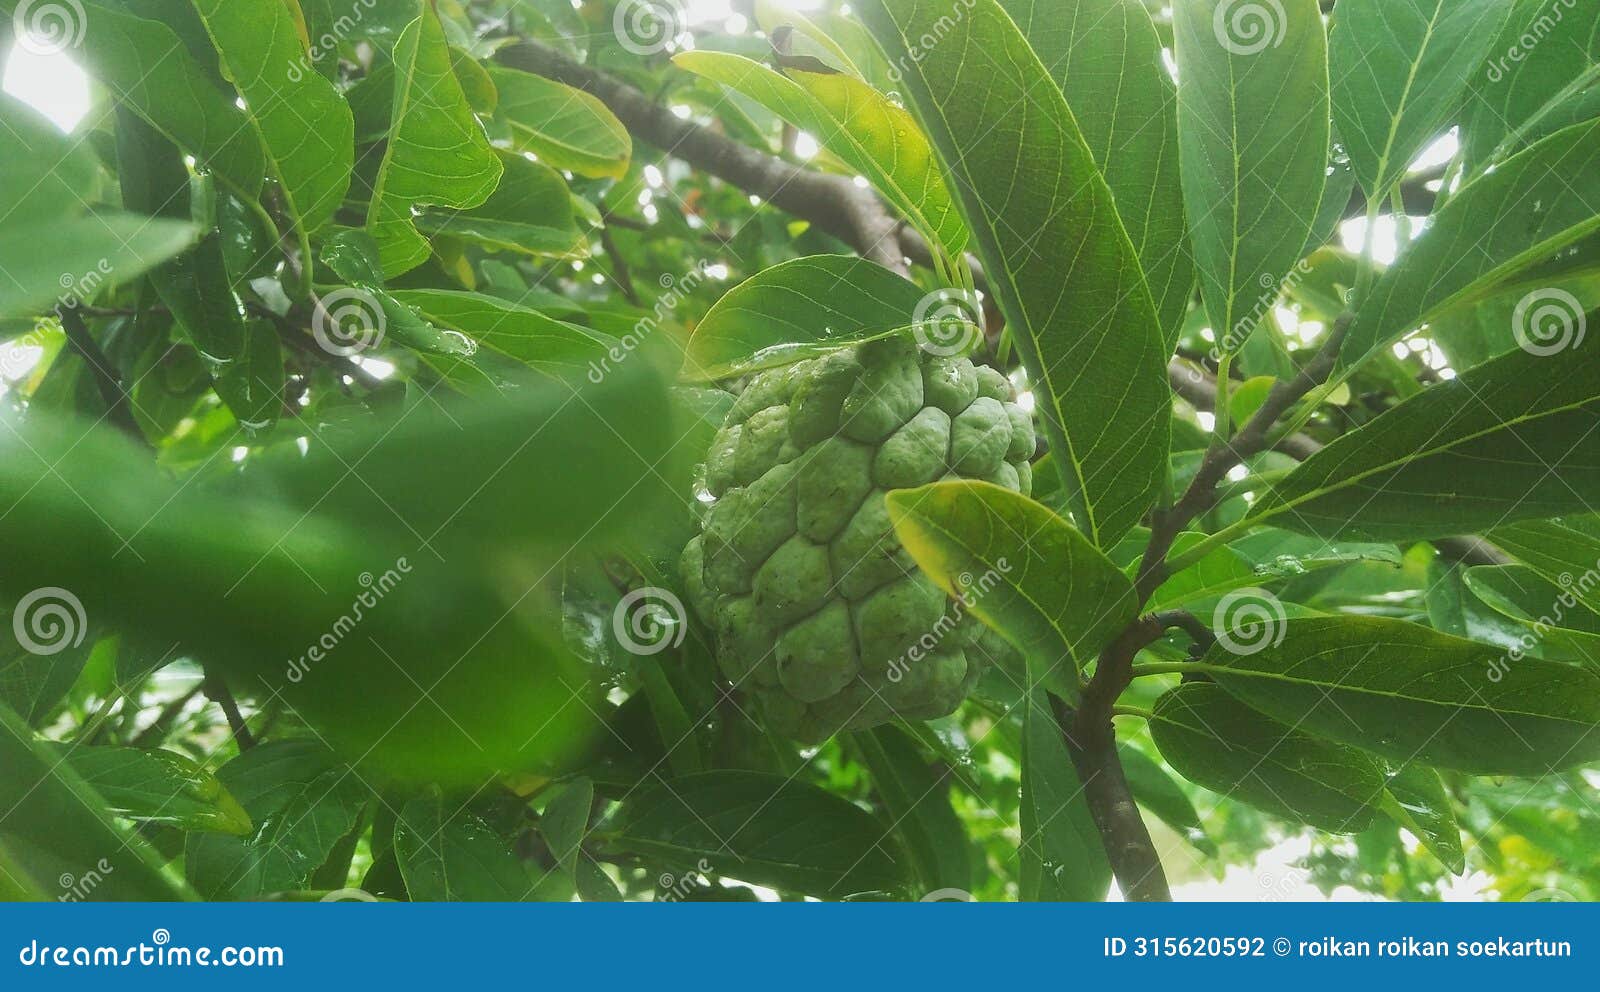 a picture of srikaya or annona squamosa or sugar apple